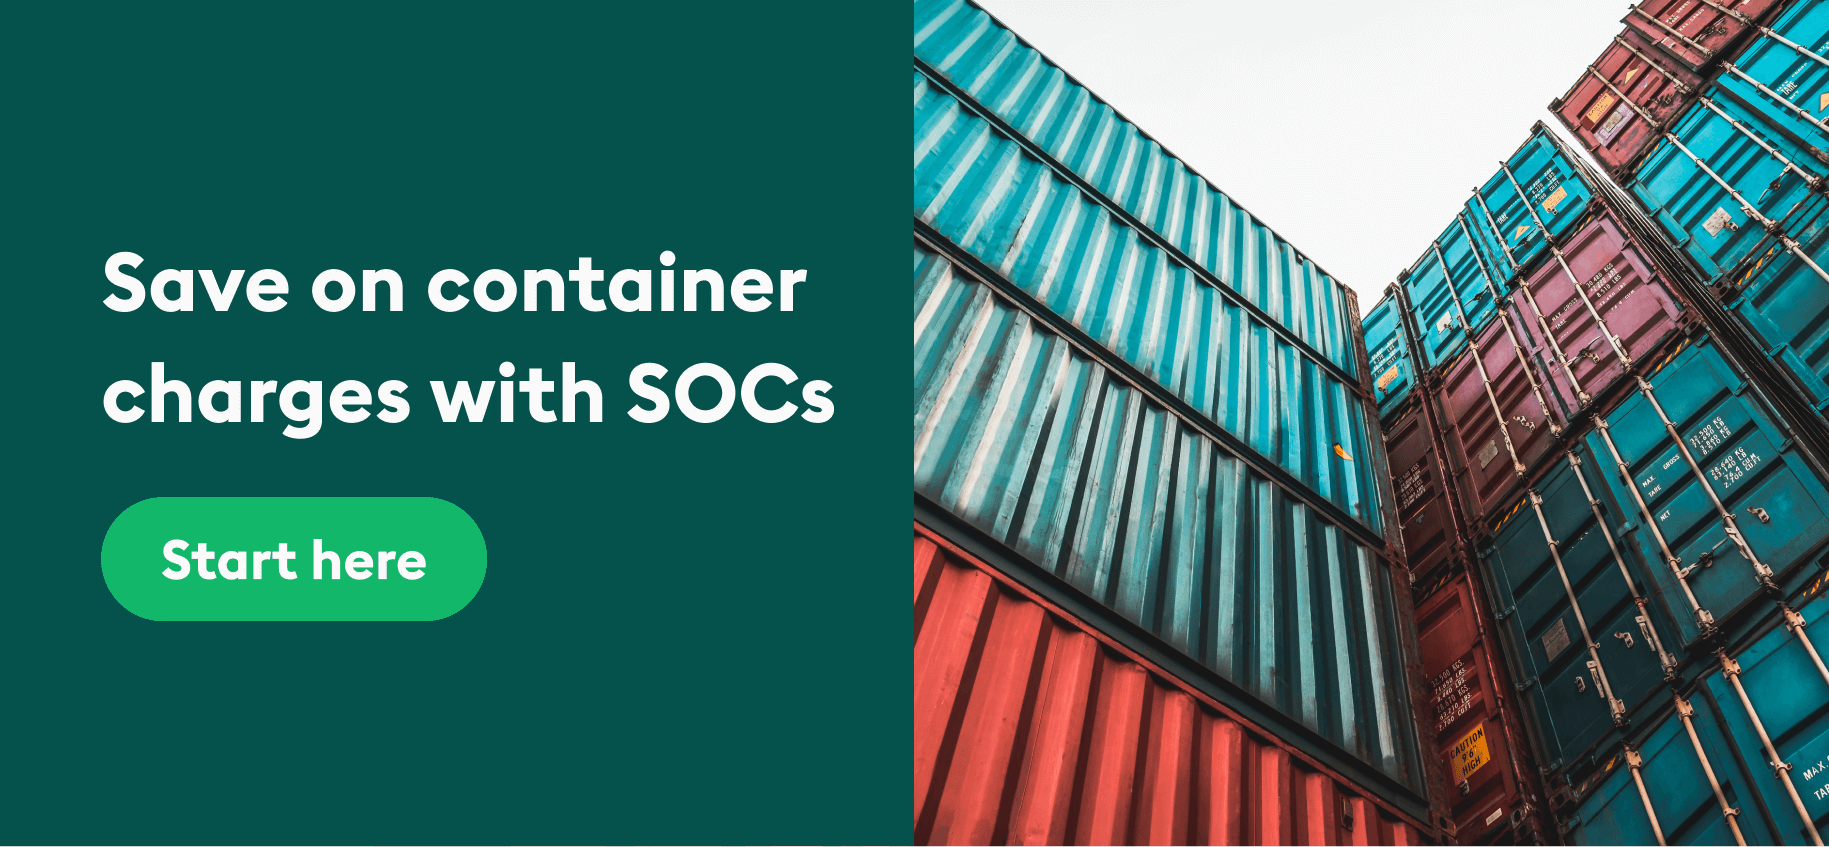 Save on container charges with SOCs